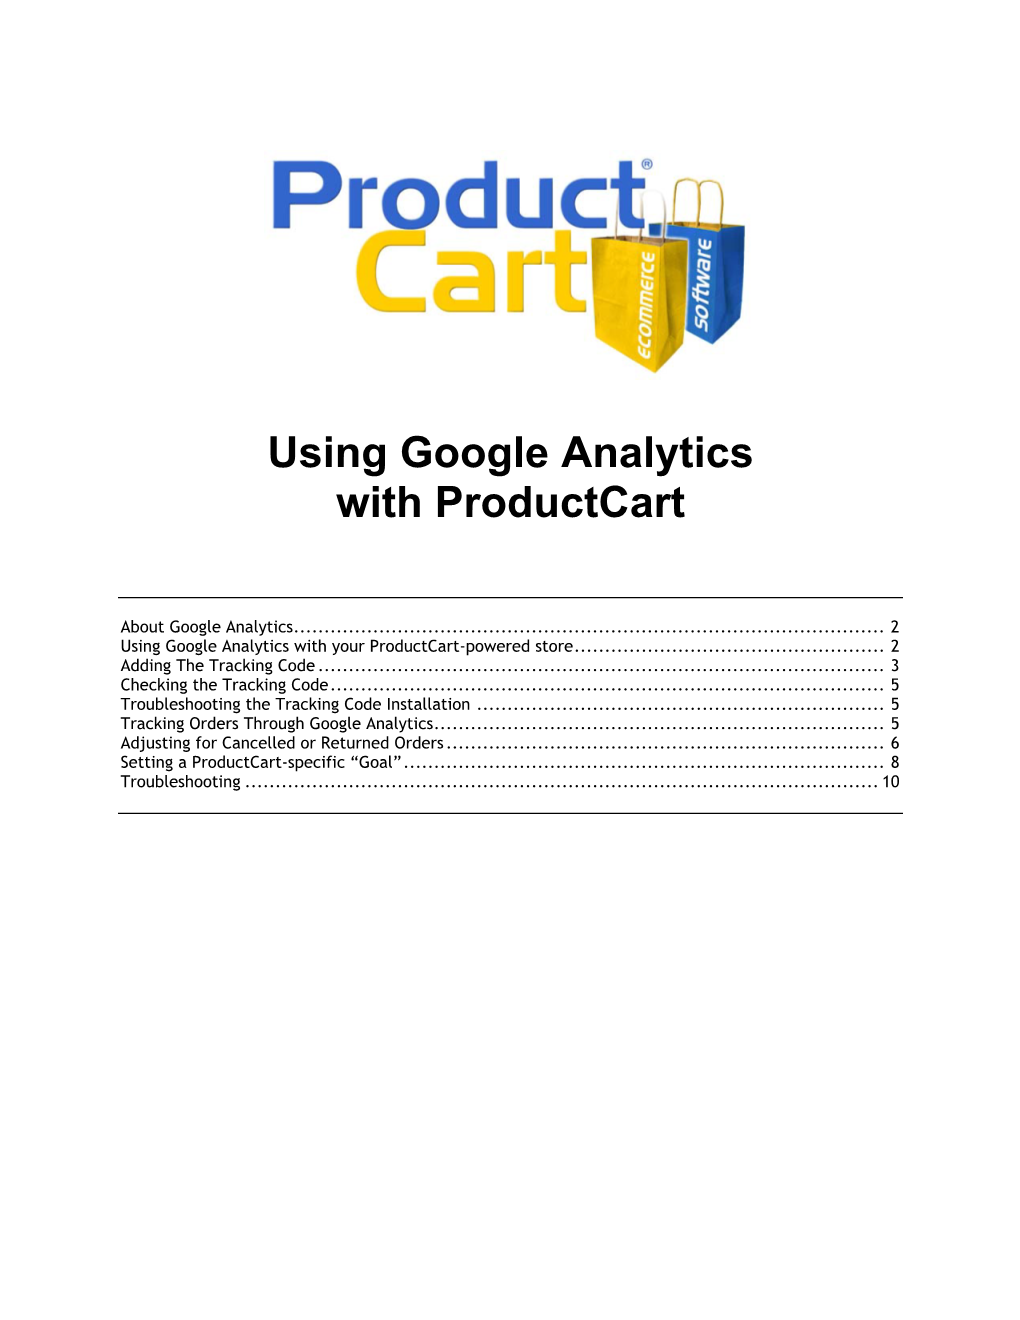 Using Google Analytics with Productcart Shopping Cart Software